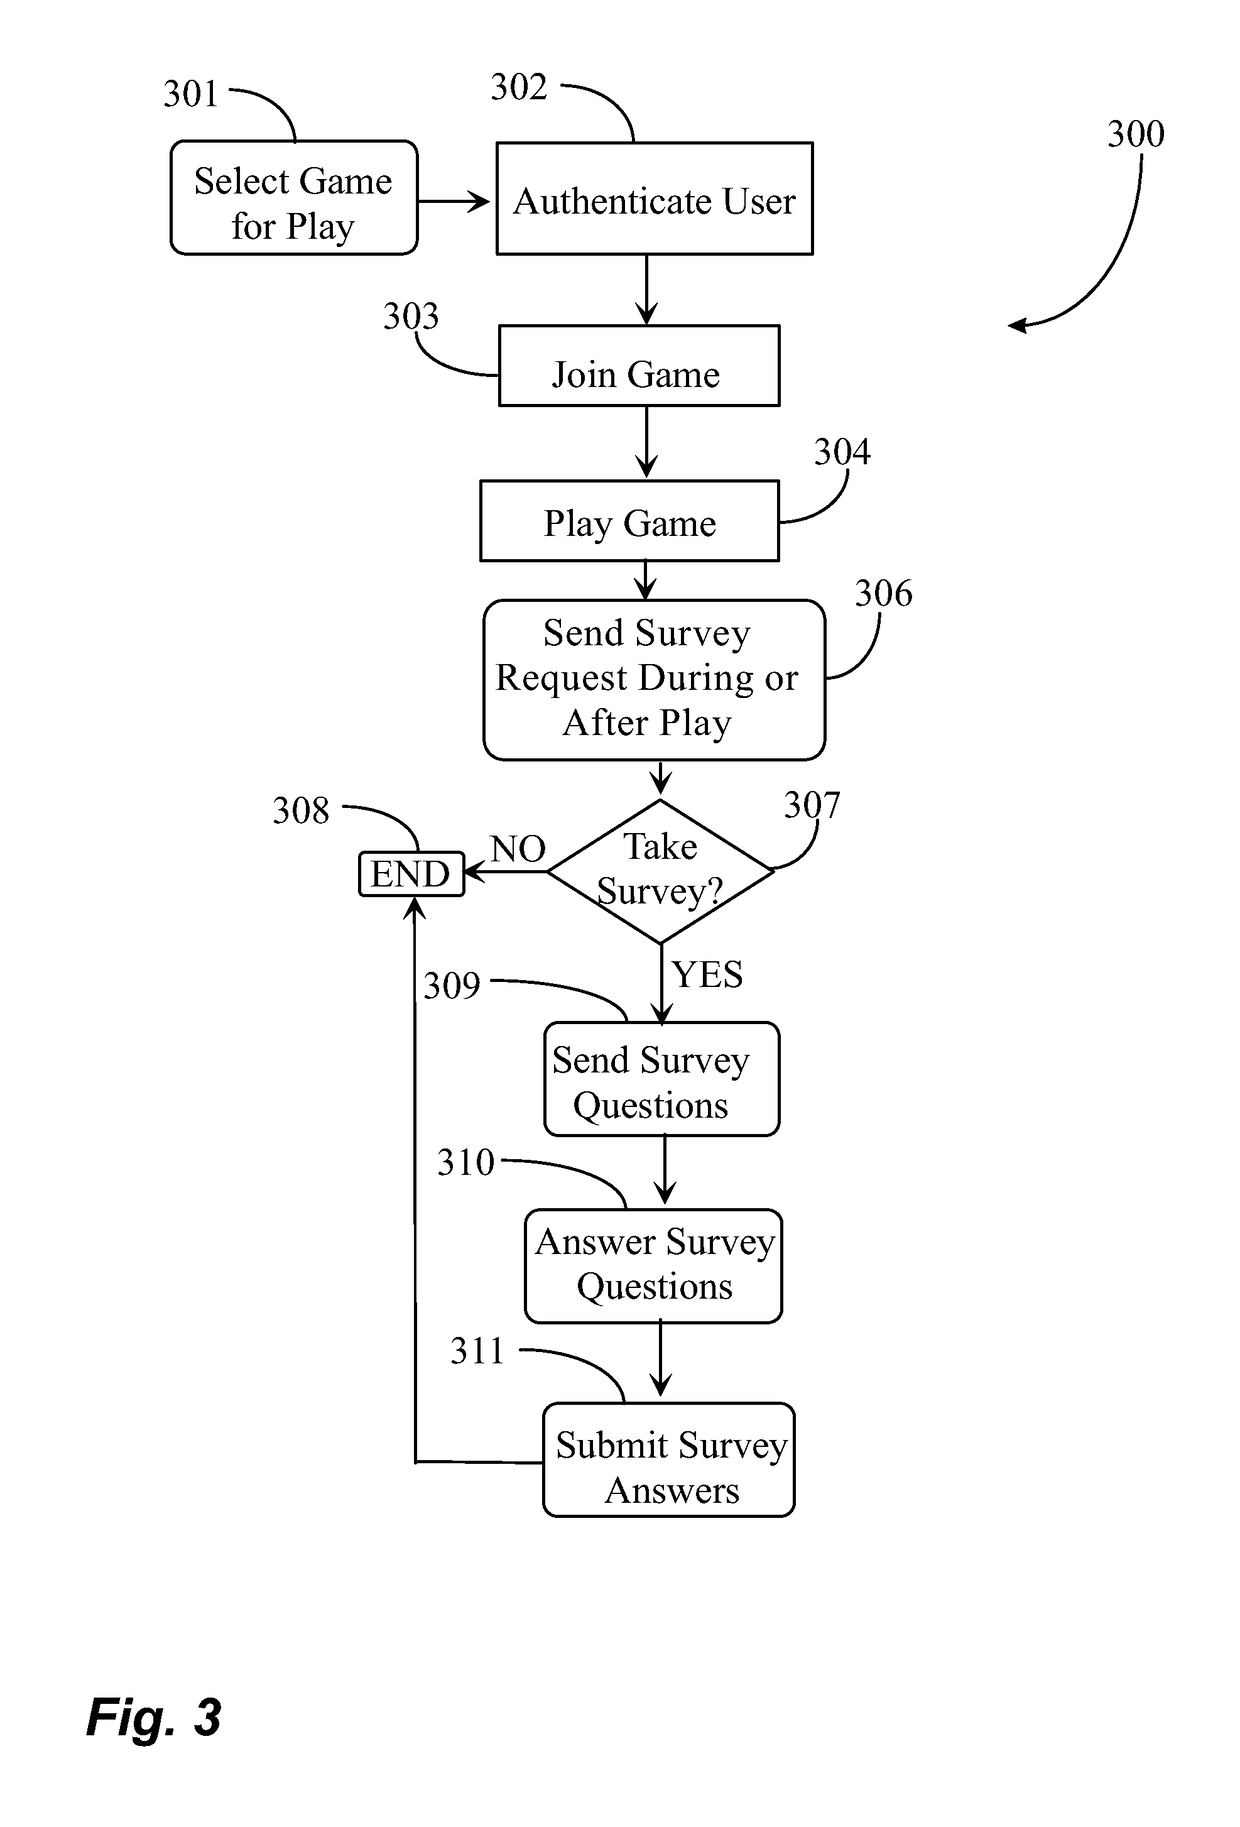 Automated Content Rating System and Network